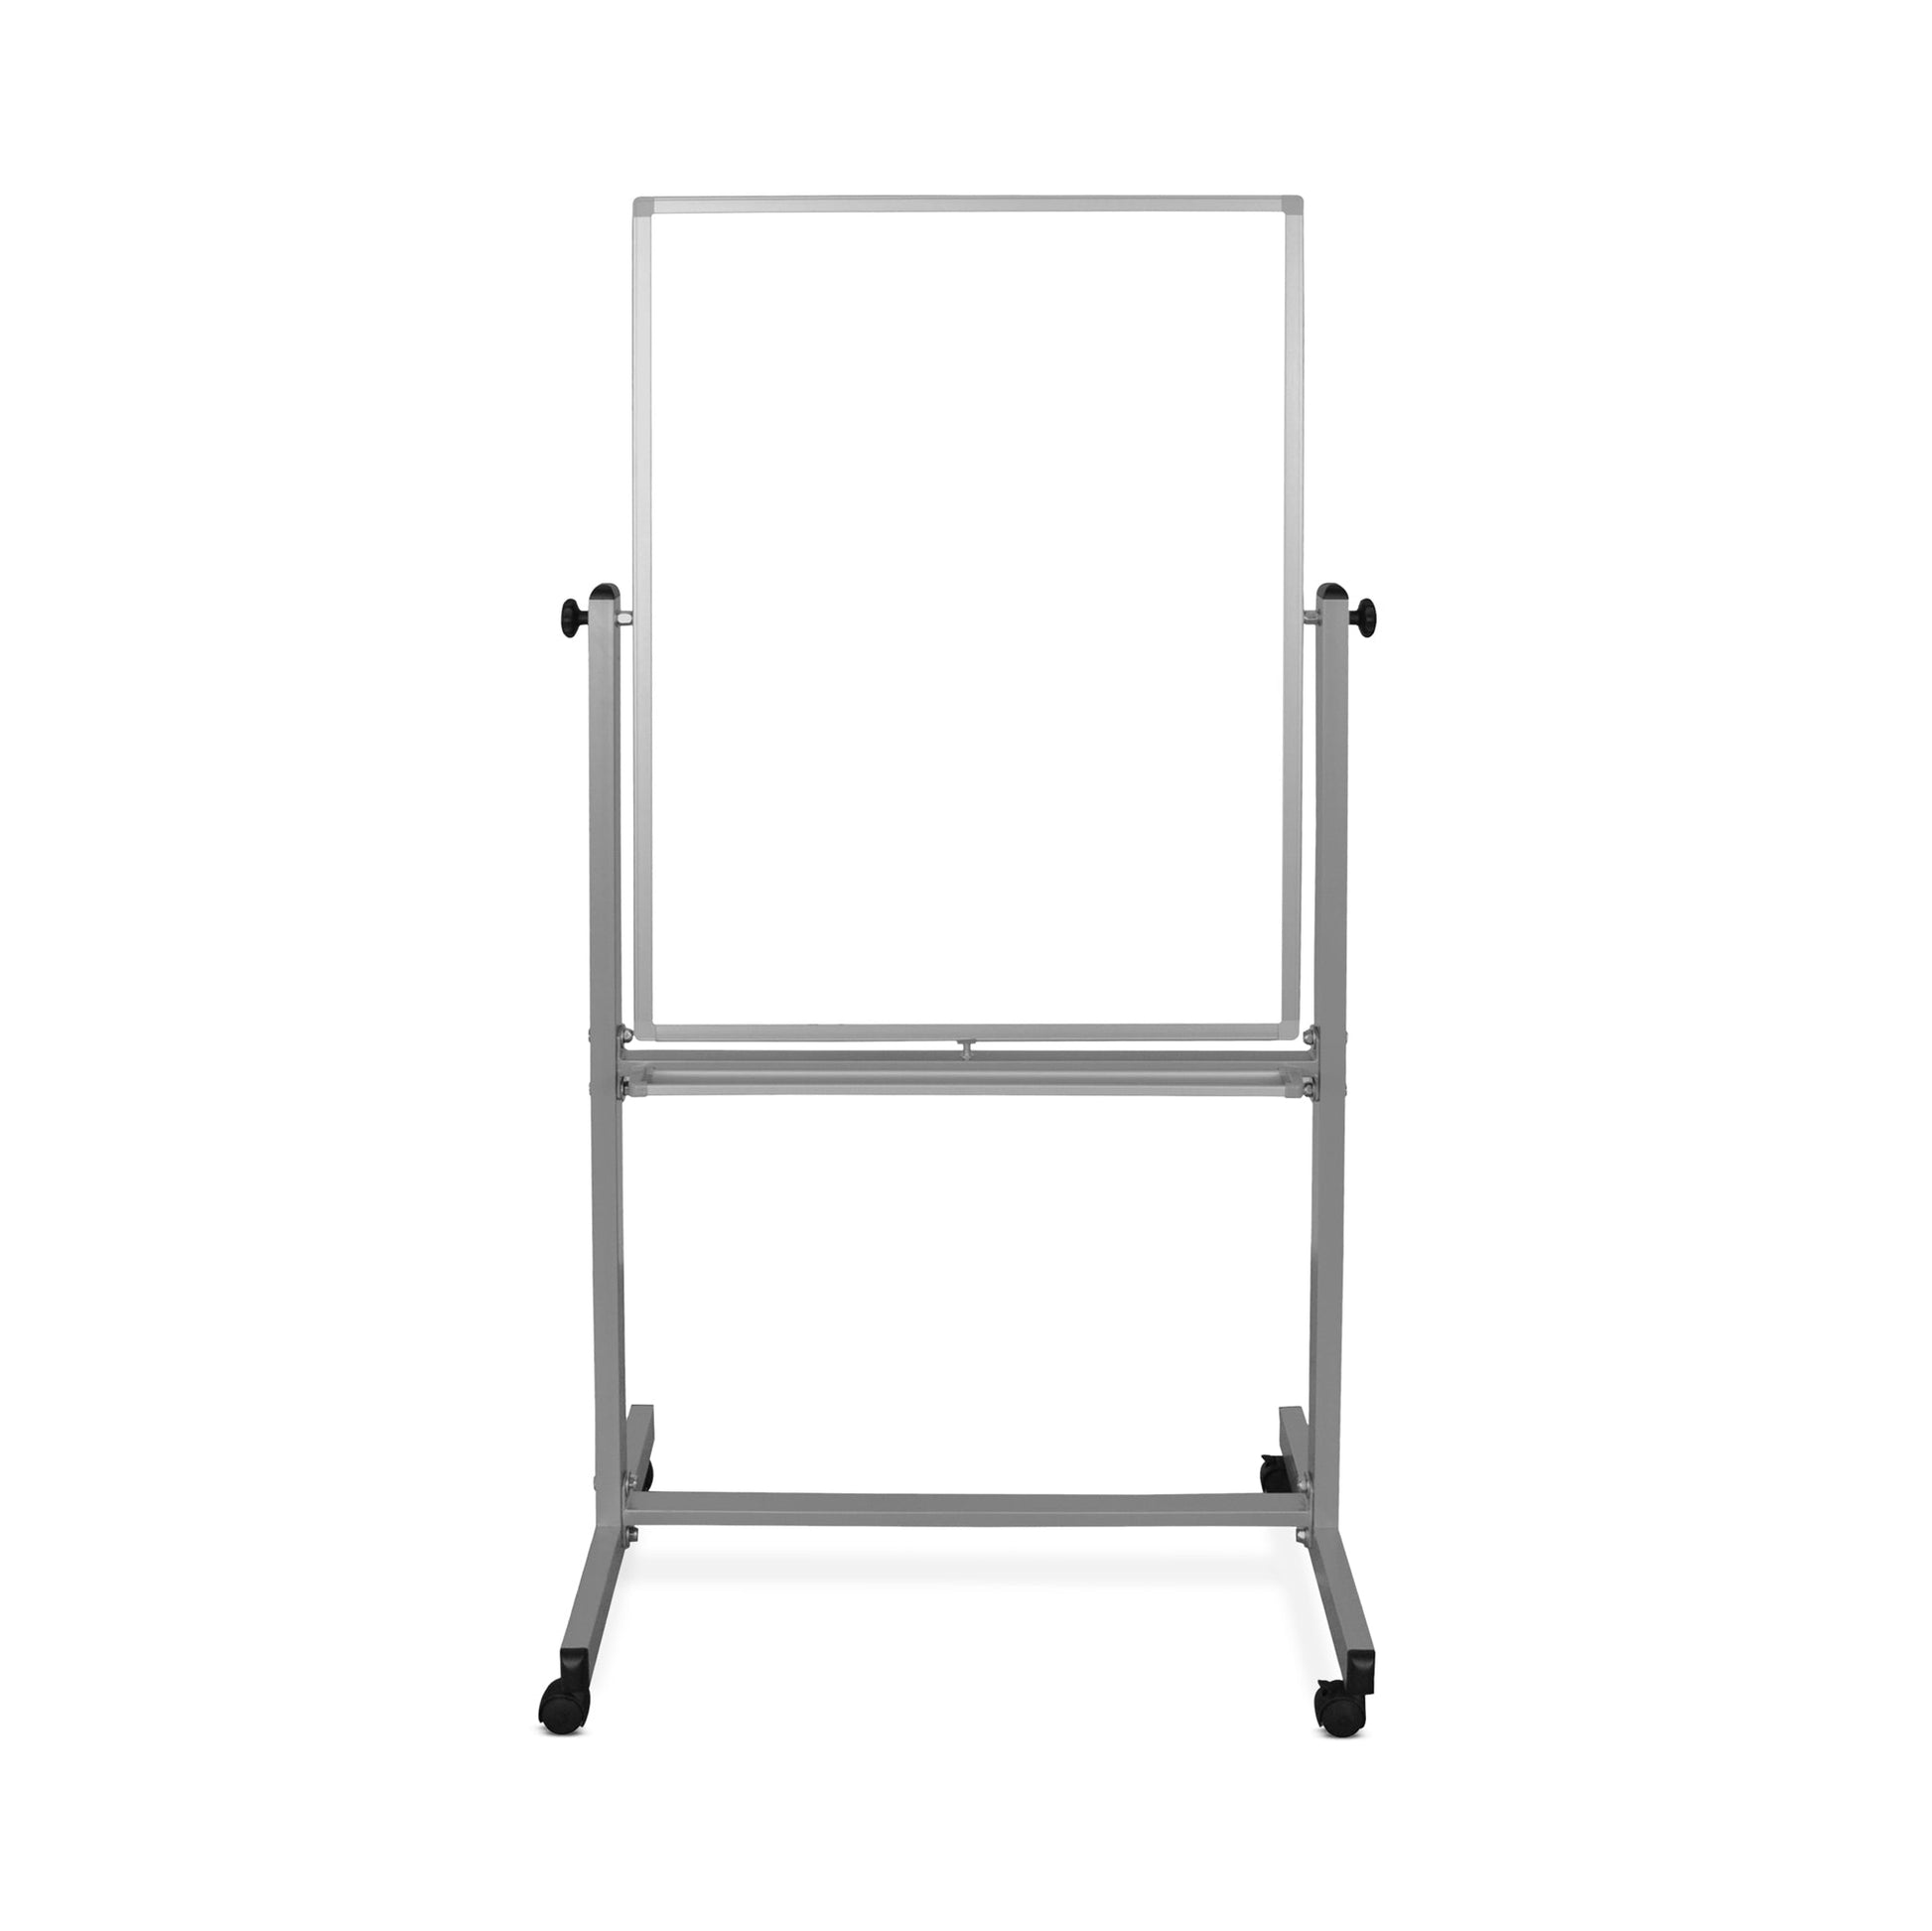 30"W x 40"H Mobile Whiteboard - Double-sided Magnetic dry erase markerboard - Luxor MB3040WW - SchoolOutlet